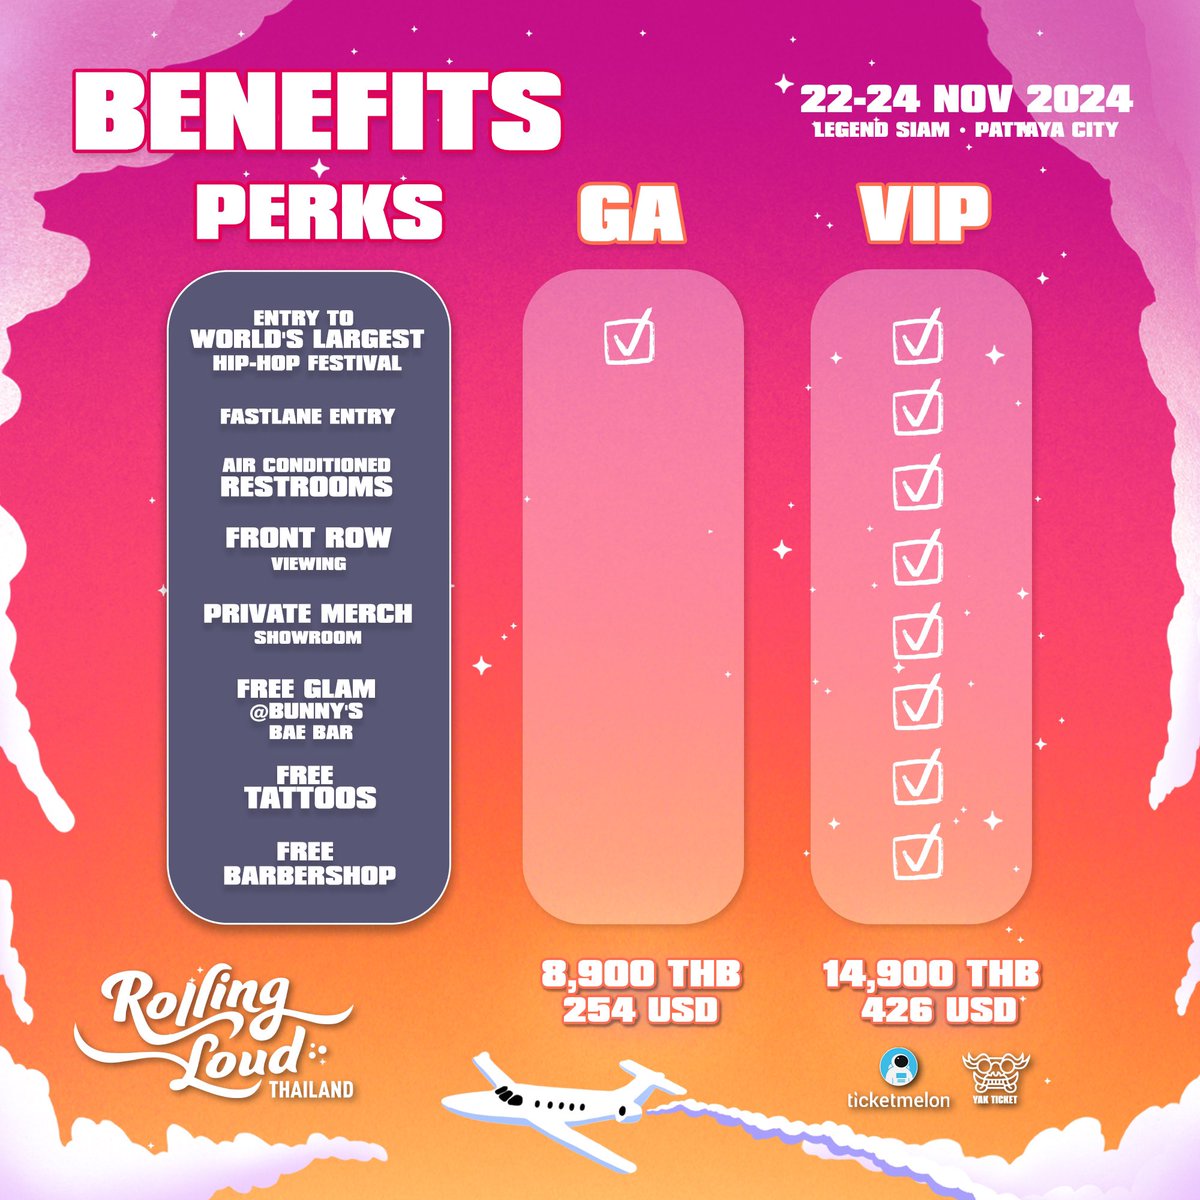 Take a look at what you can expect in GA & VIP Ticketmelon: ticketmelon.com/rollingloudtha… Yakticket: yakticket.com/th SIGN UP FOR UPDATES 👉 RollingLoud.com/thailand